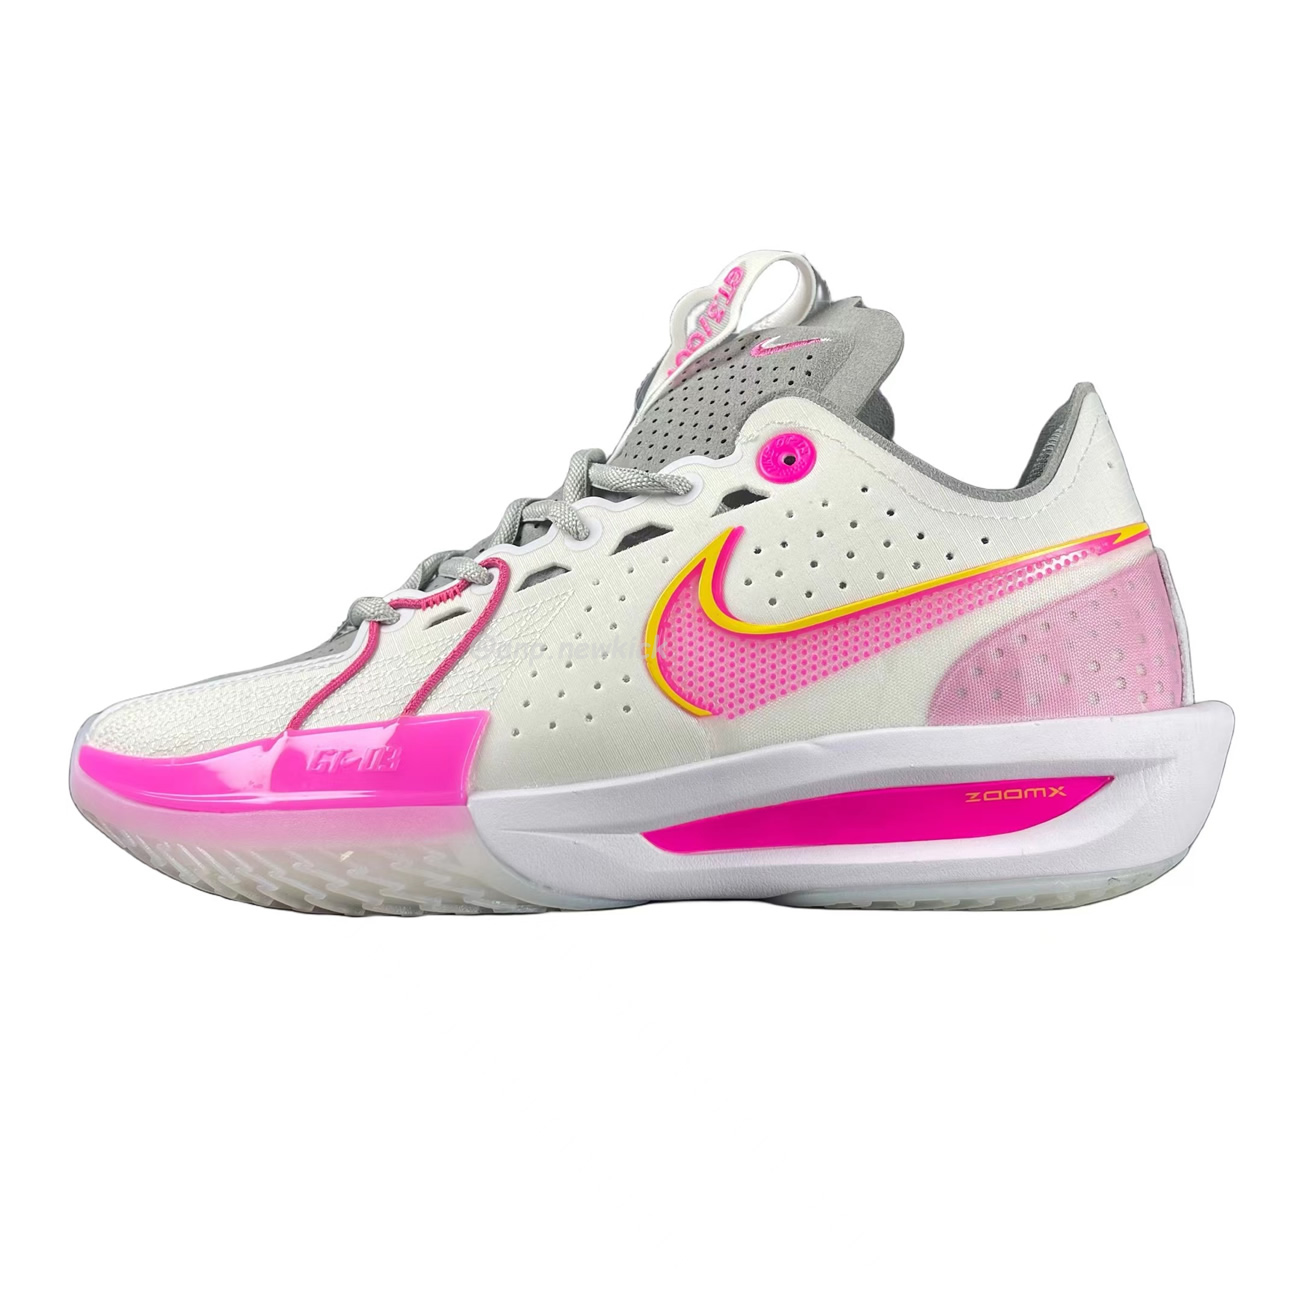 Nike Zoom Gt Cut 3 Be True To Her School White Picante Red Vapor Green University Think Pink (7) - newkick.org